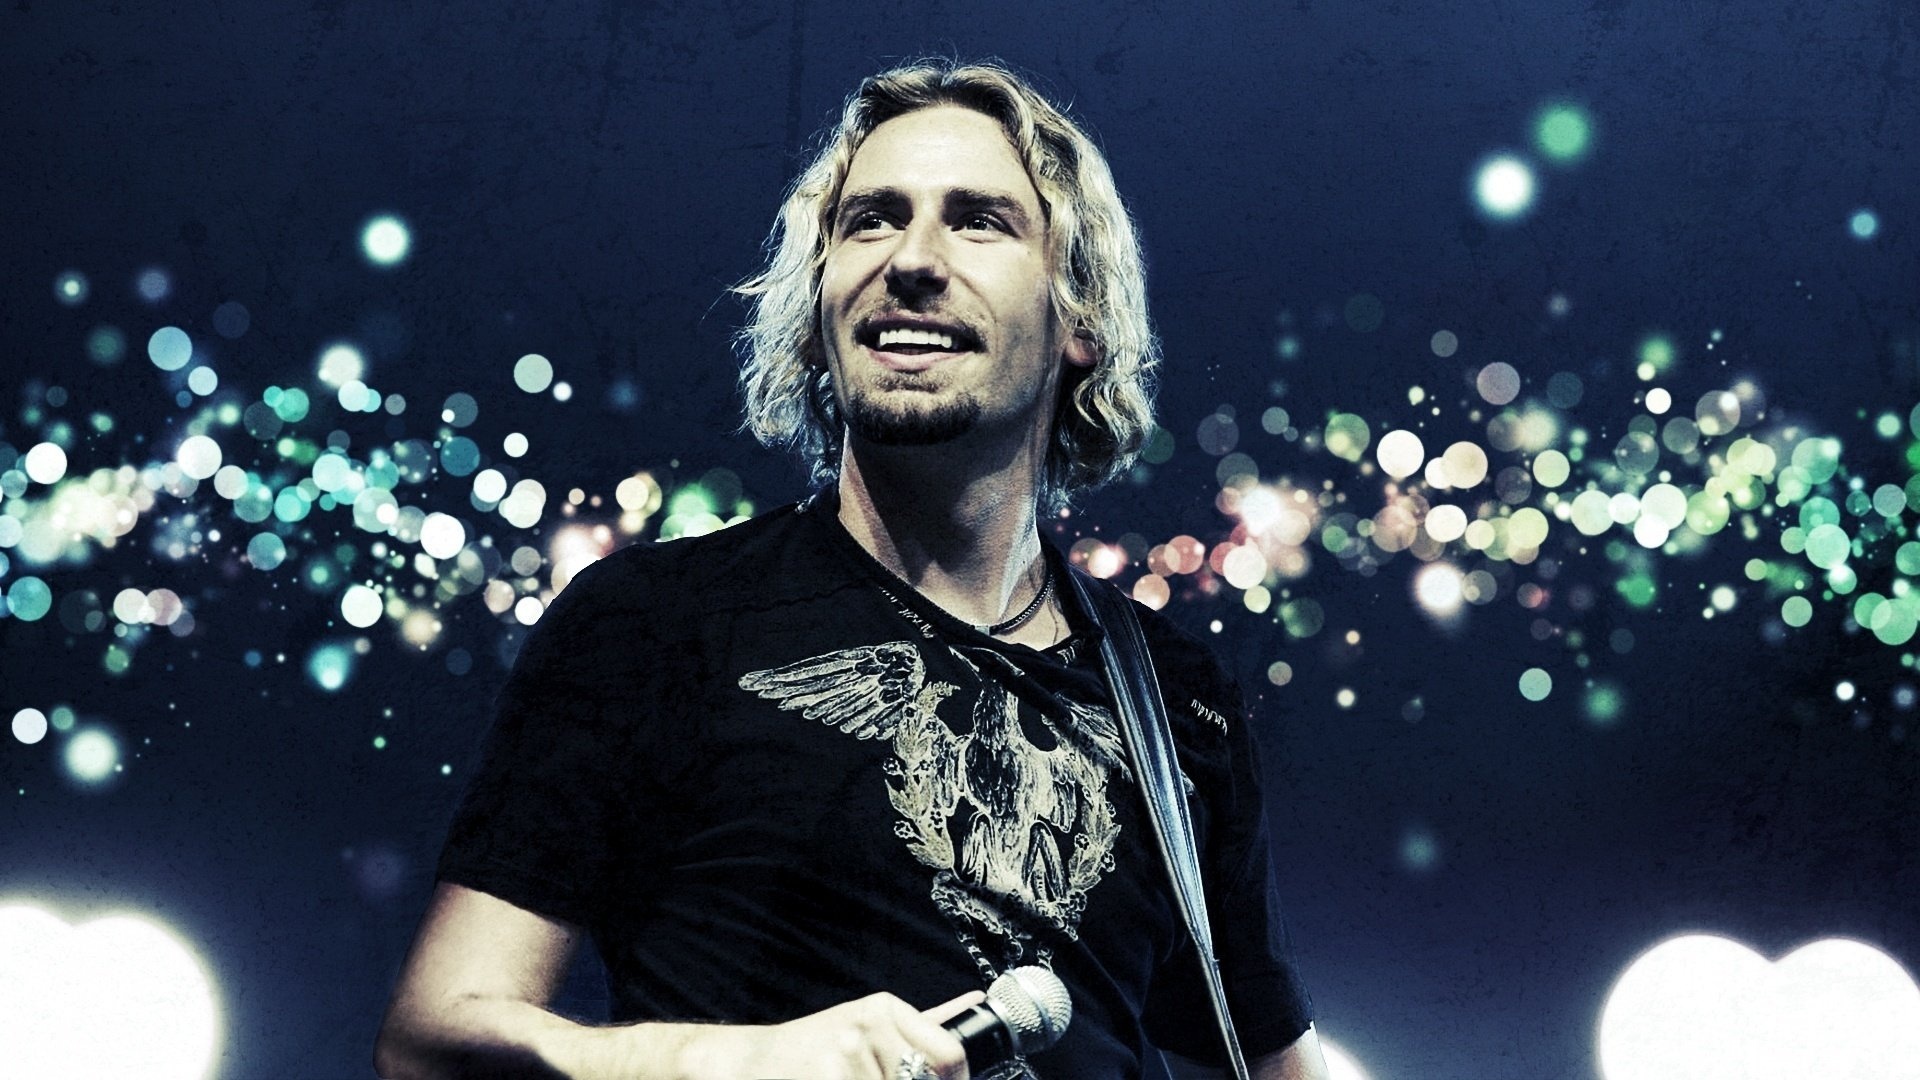 Nickelback: Chad Kroeger, Involved with a variety of collaborations. 1920x1080 Full HD Wallpaper.